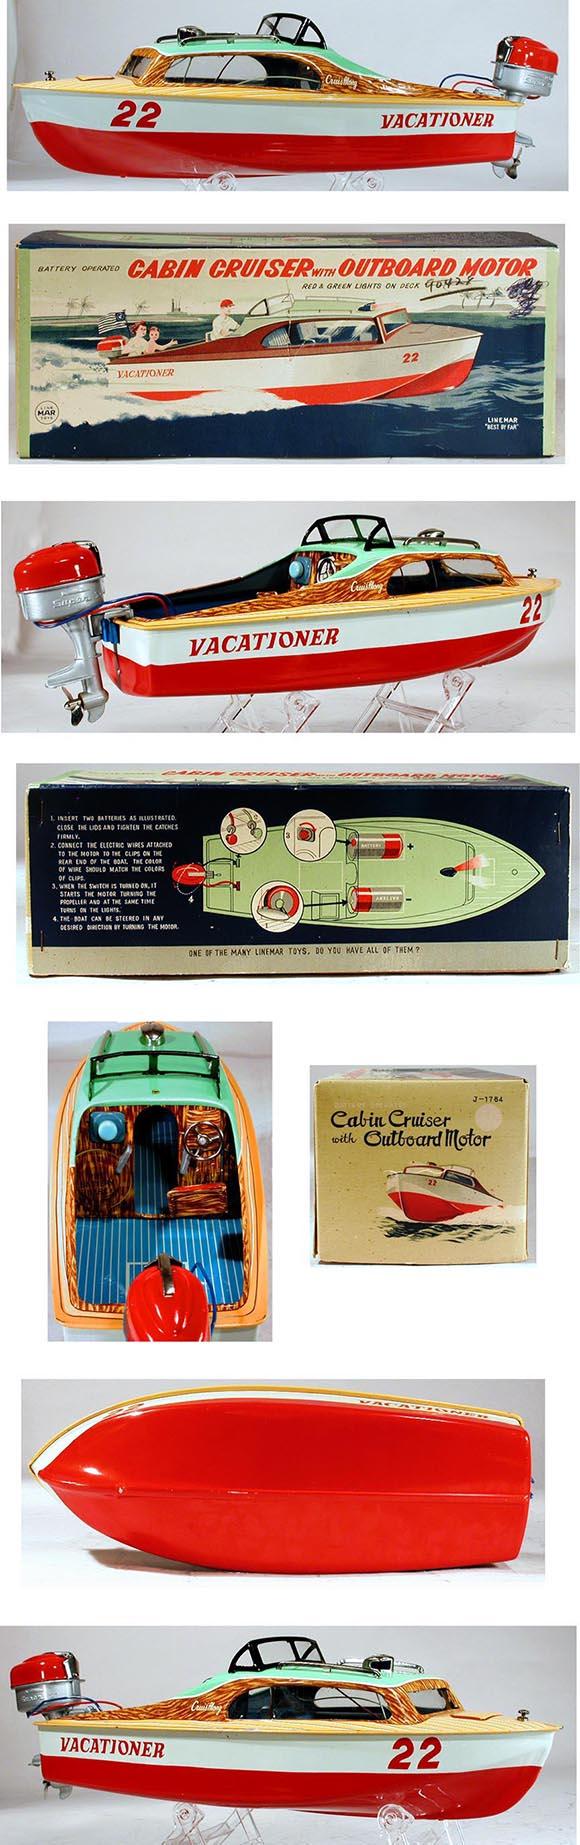 c.1955 Linemar, Cabin Cruiser with Outboard Motor in Original Box